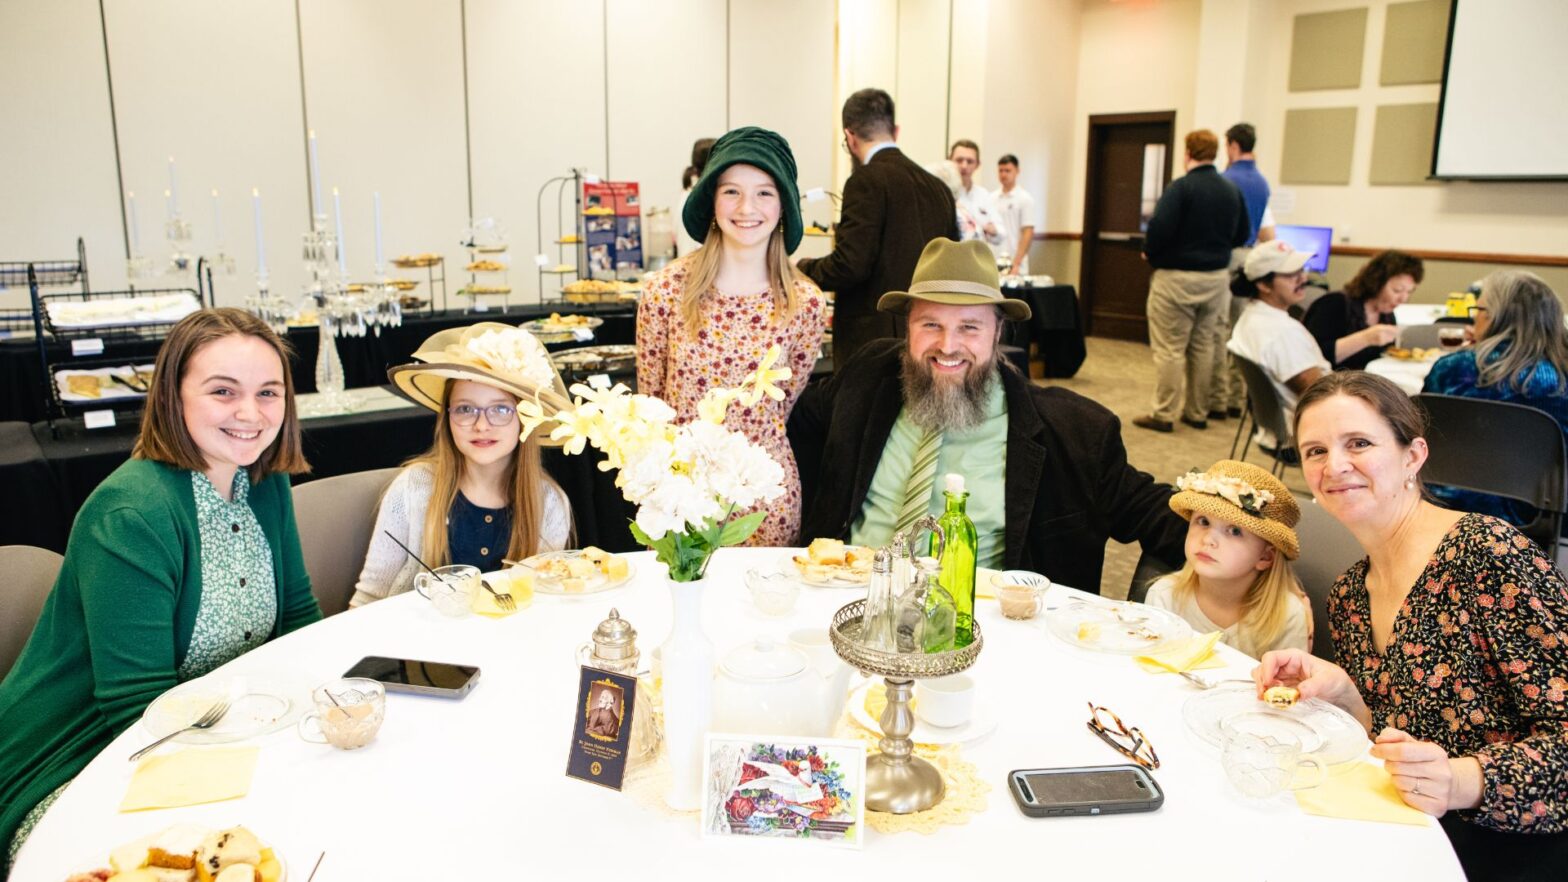 The Umbarger family sits at a table during the St. John Henry Newman High Tea event in the Dugan-Gorges Conference Center.